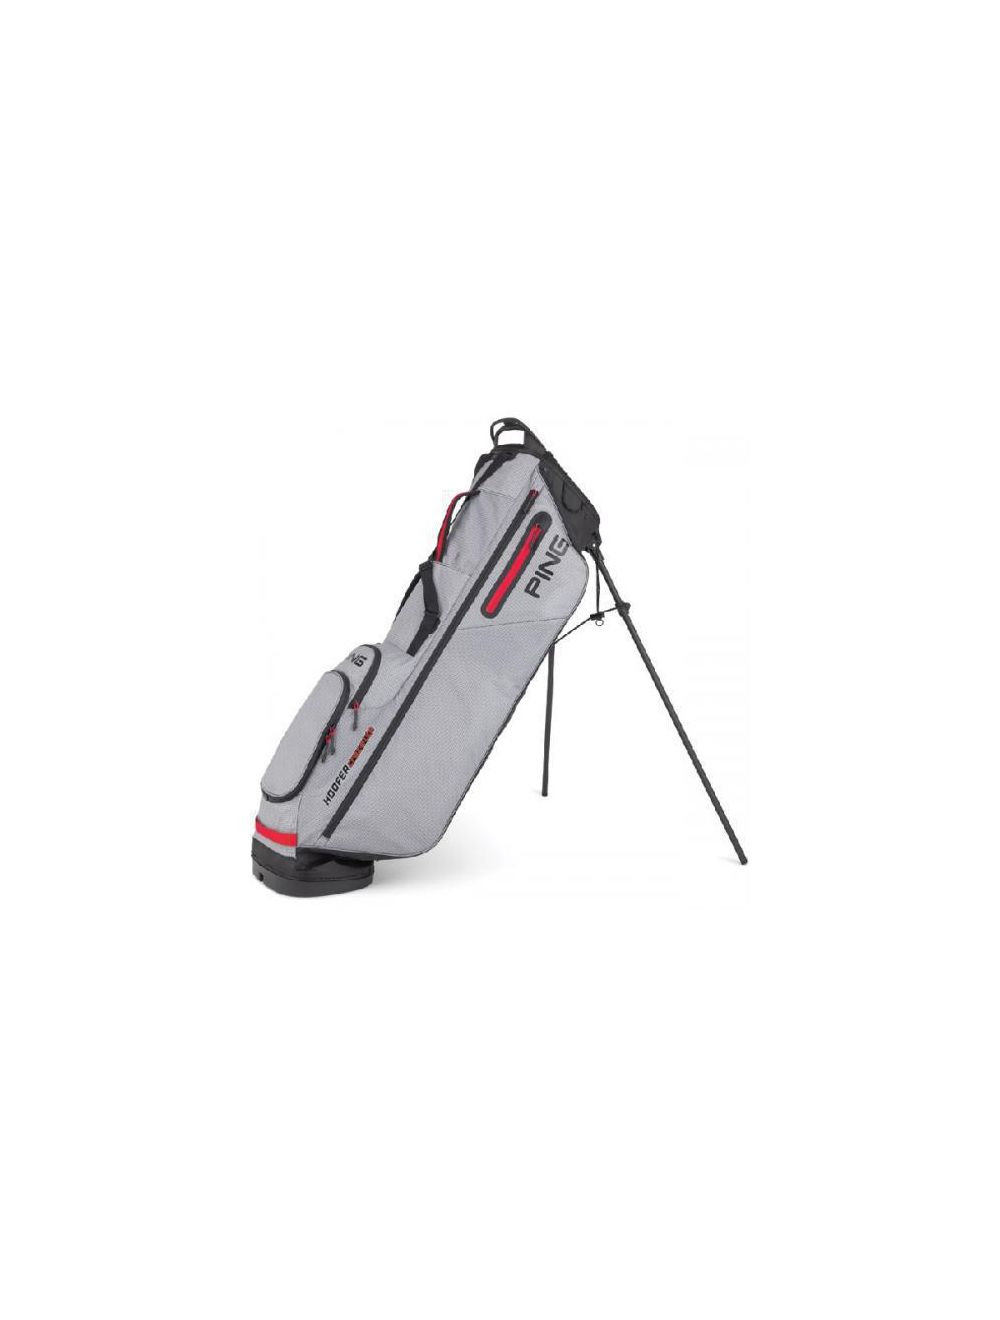 Buy Ping 2022 Hoofer Stand Bag | Golf Discount